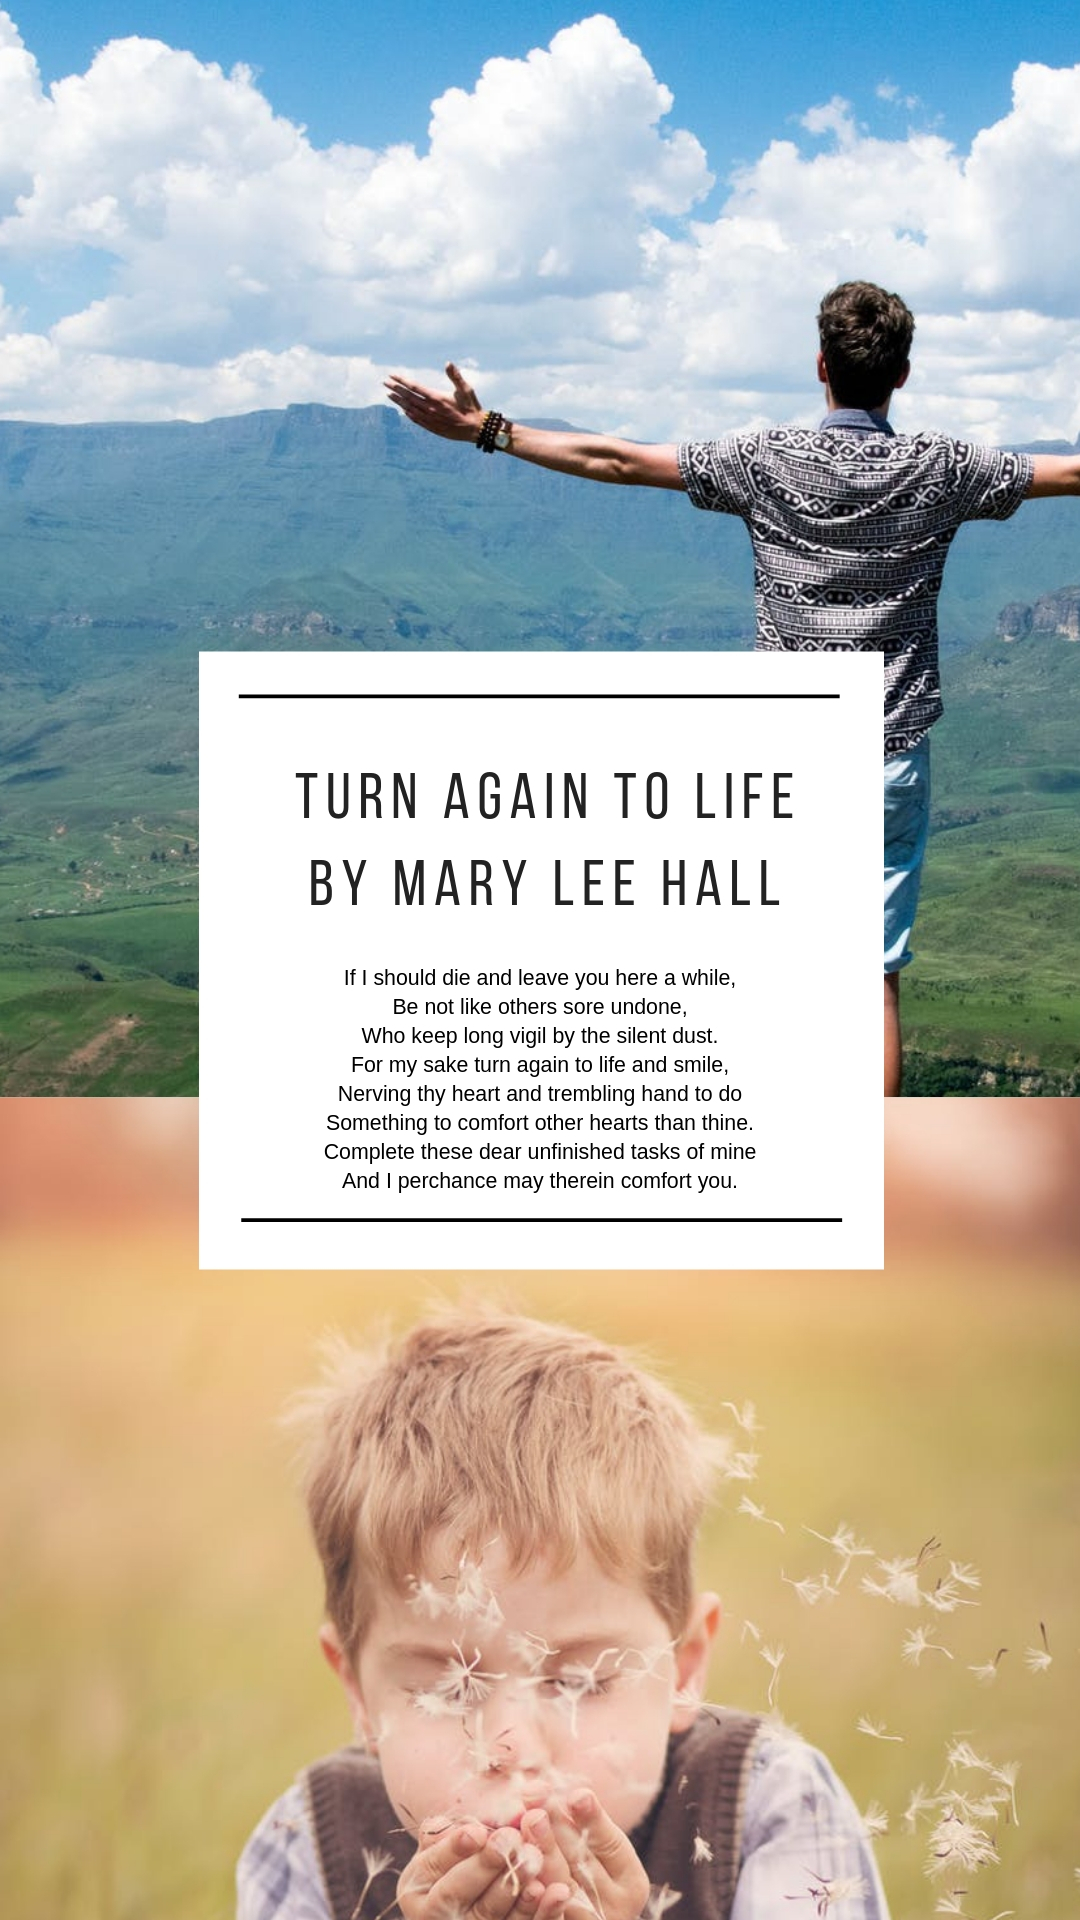 Turn Again to Life by Mar Lee Hall